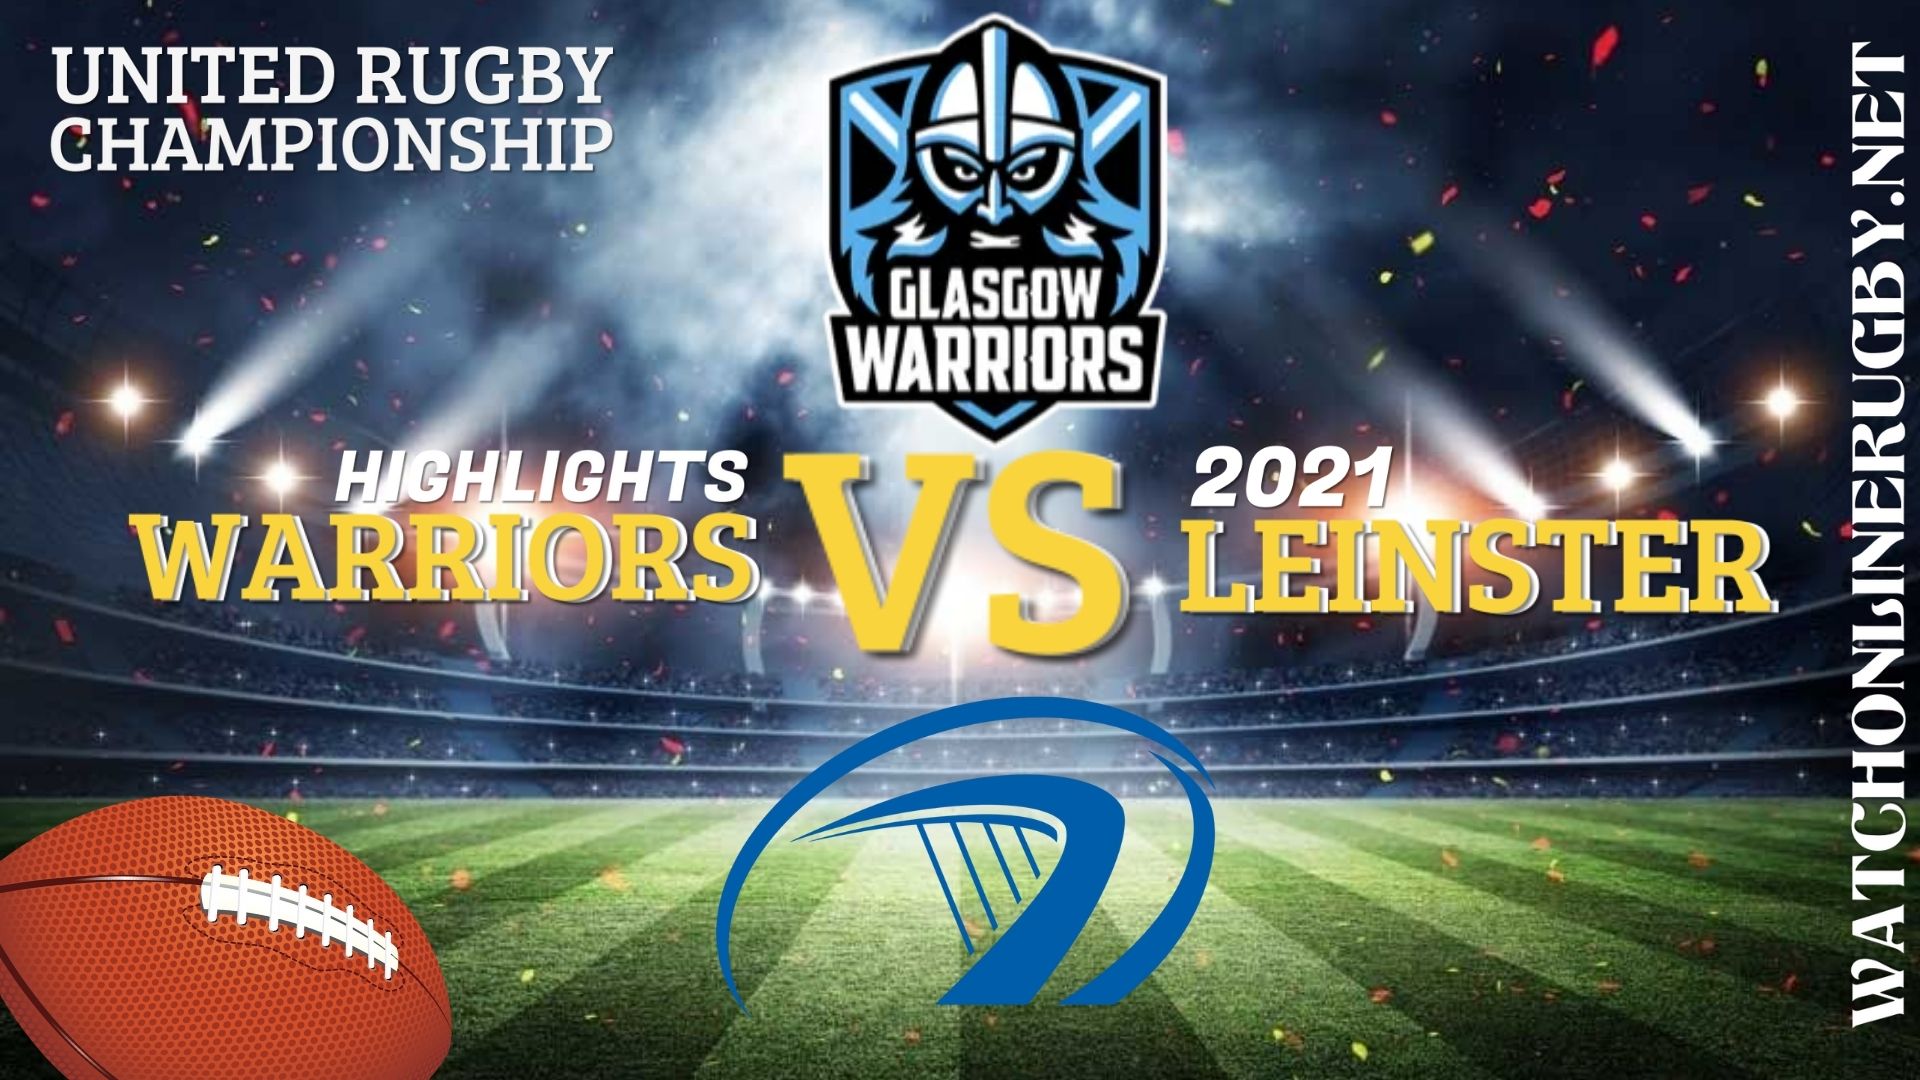 Glasgow Warriors Vs Leinster United Rugby Championship 2021 RD 6